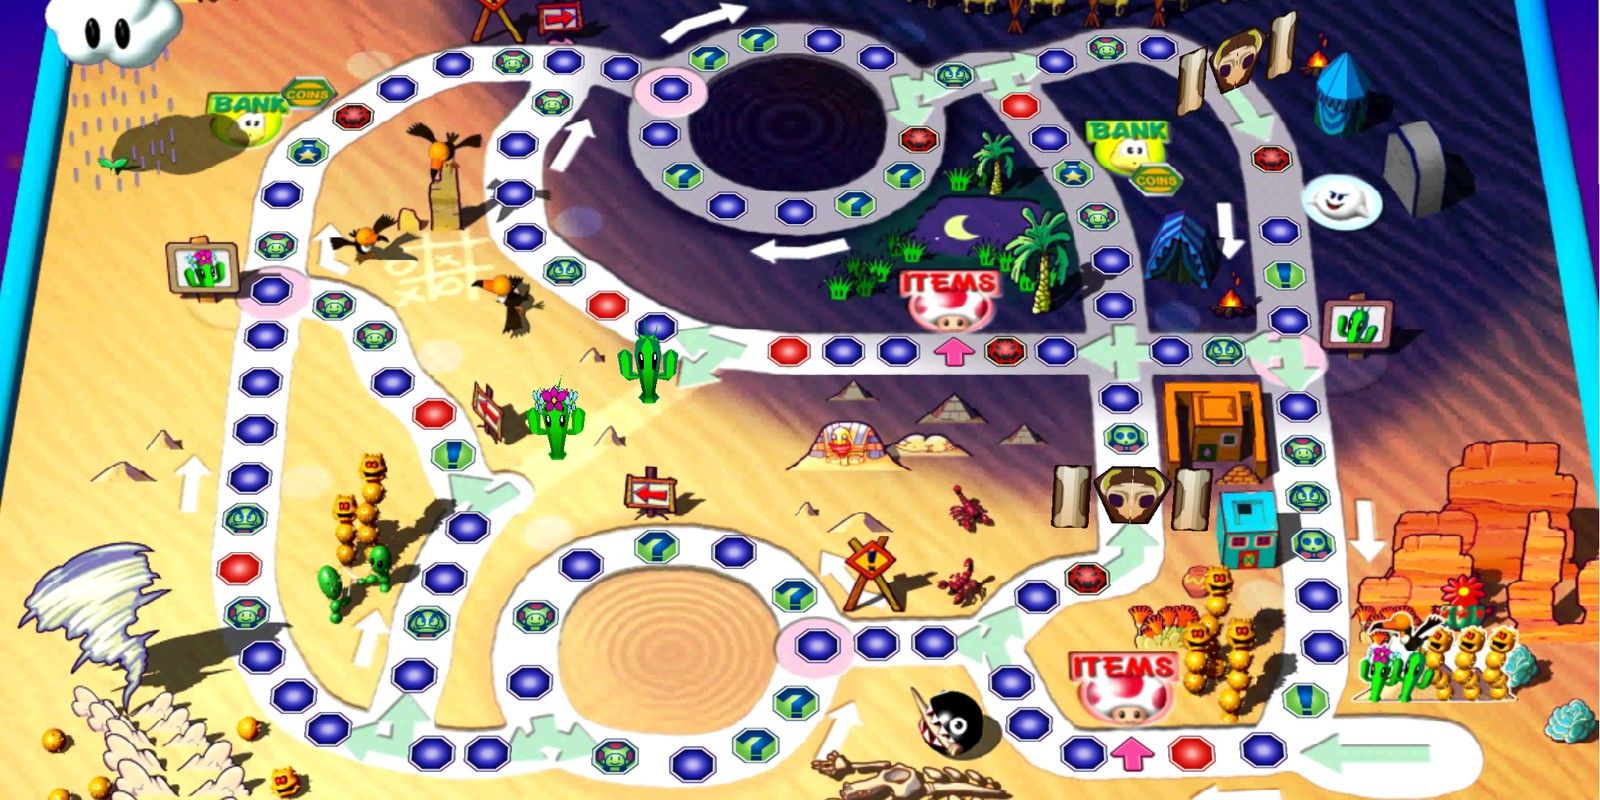 An overview of the Spiny Desert board from Mario Party 3